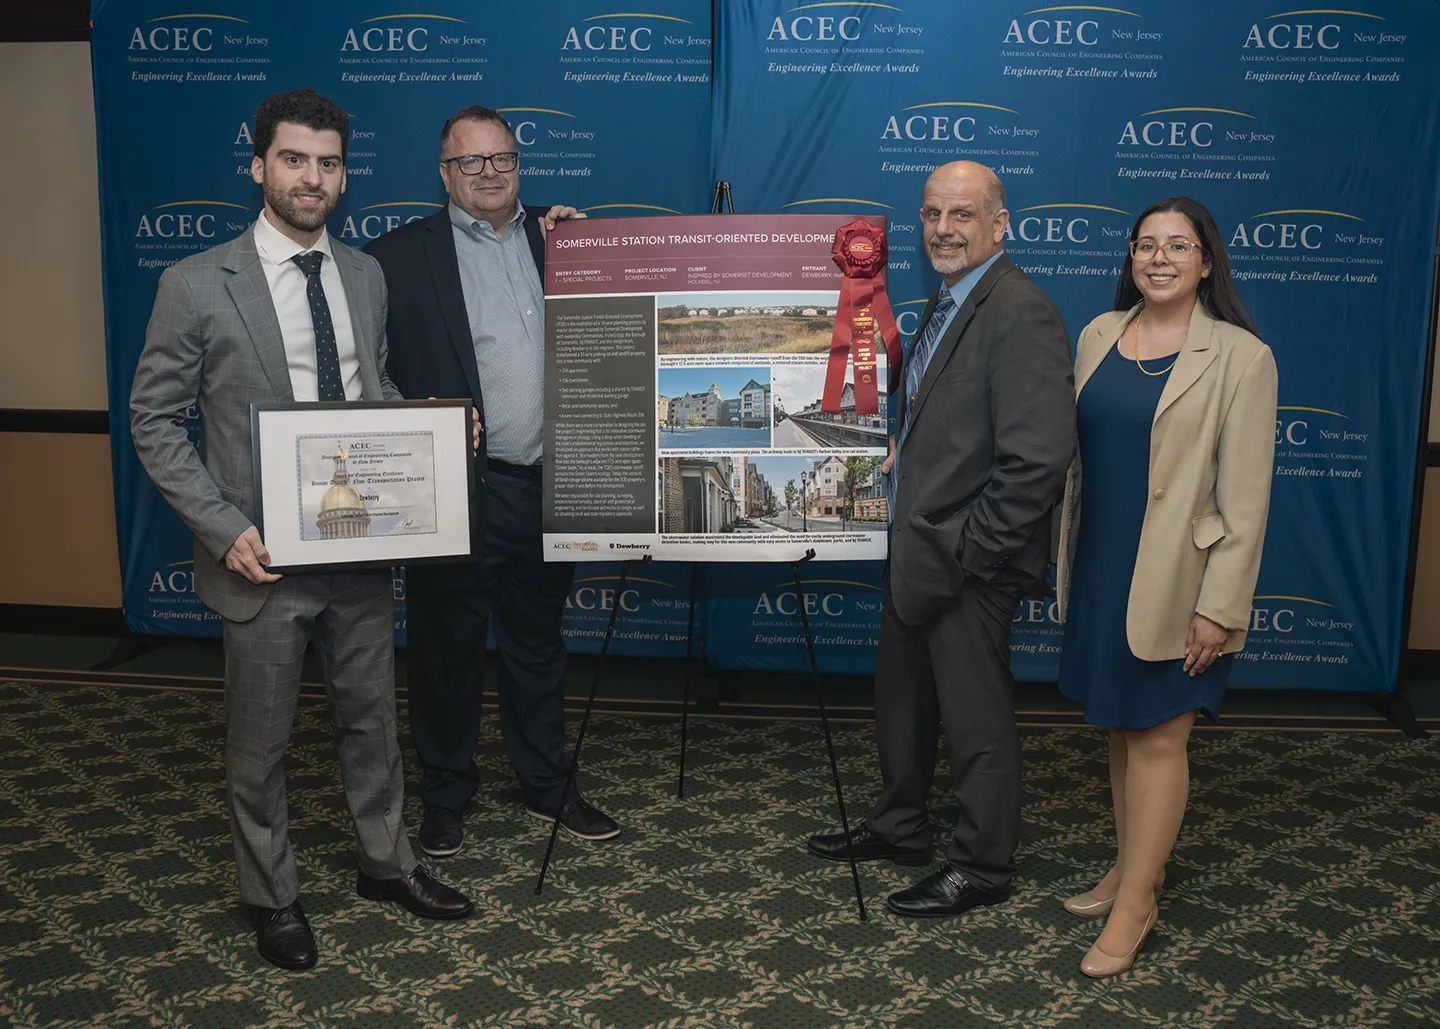 The project team for the Somerville Station Transit-Oriented Development project at the ACEC NJ Engineering Excellence awards dinner event.